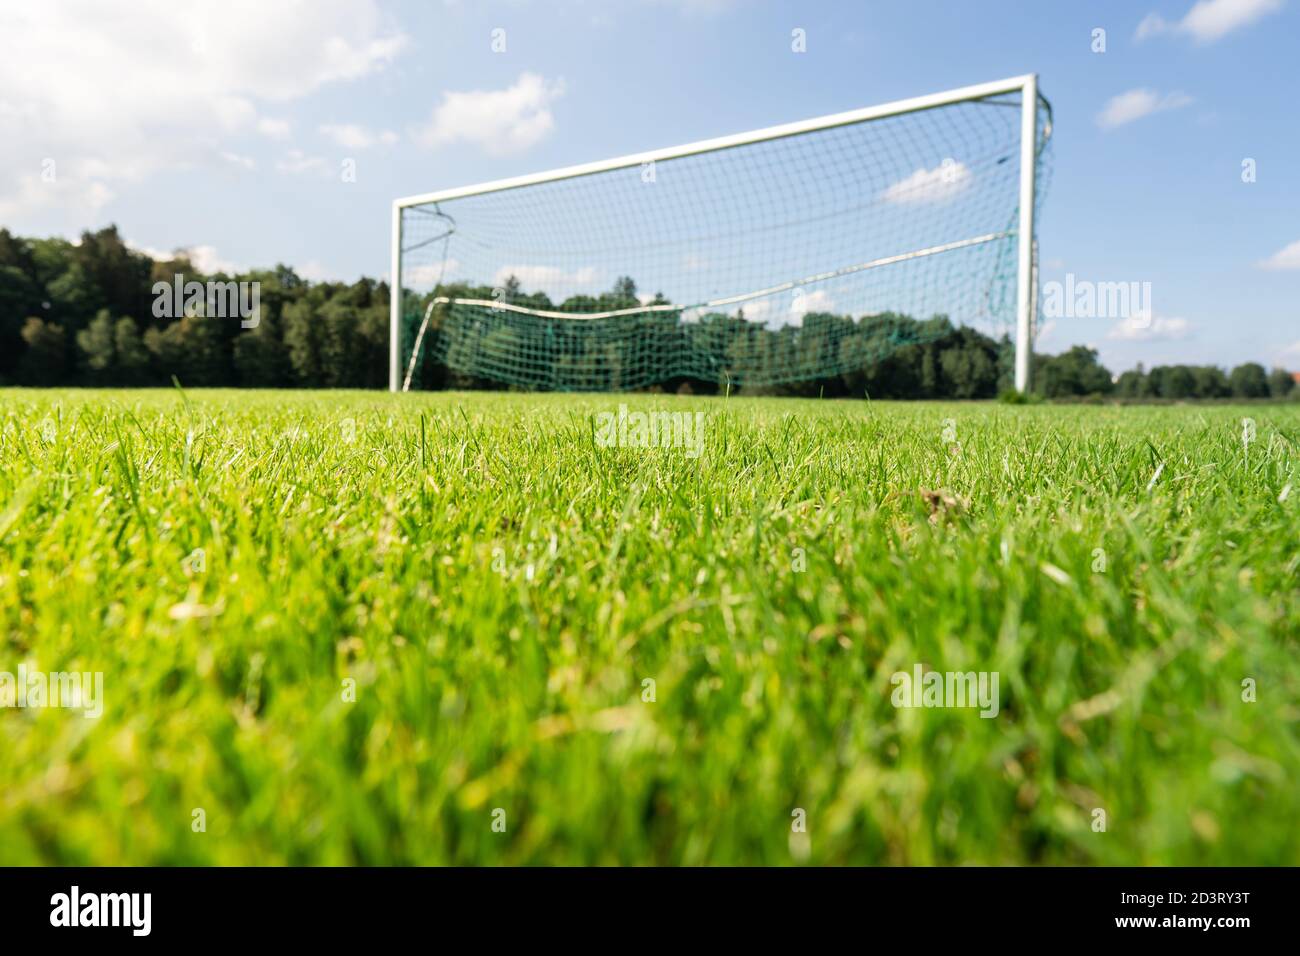 Focus on green grass of a football field with blurry goal in the background. Stock Photo